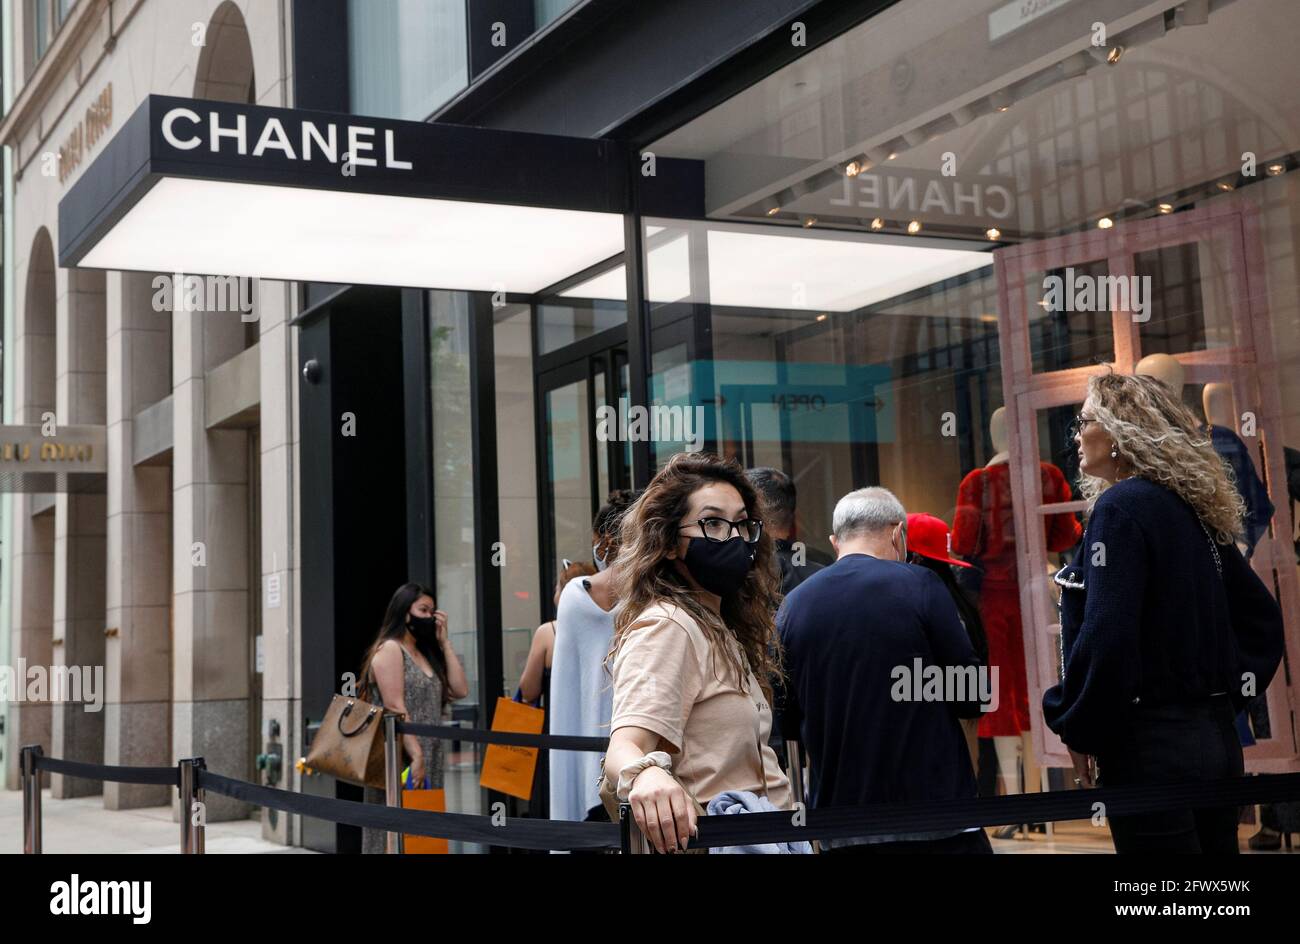 Shoppers wait in line to enter the Chanel store on 57th St in New York  City, ., May 24, 2021. REUTERS/Brendan McDermid Stock Photo - Alamy